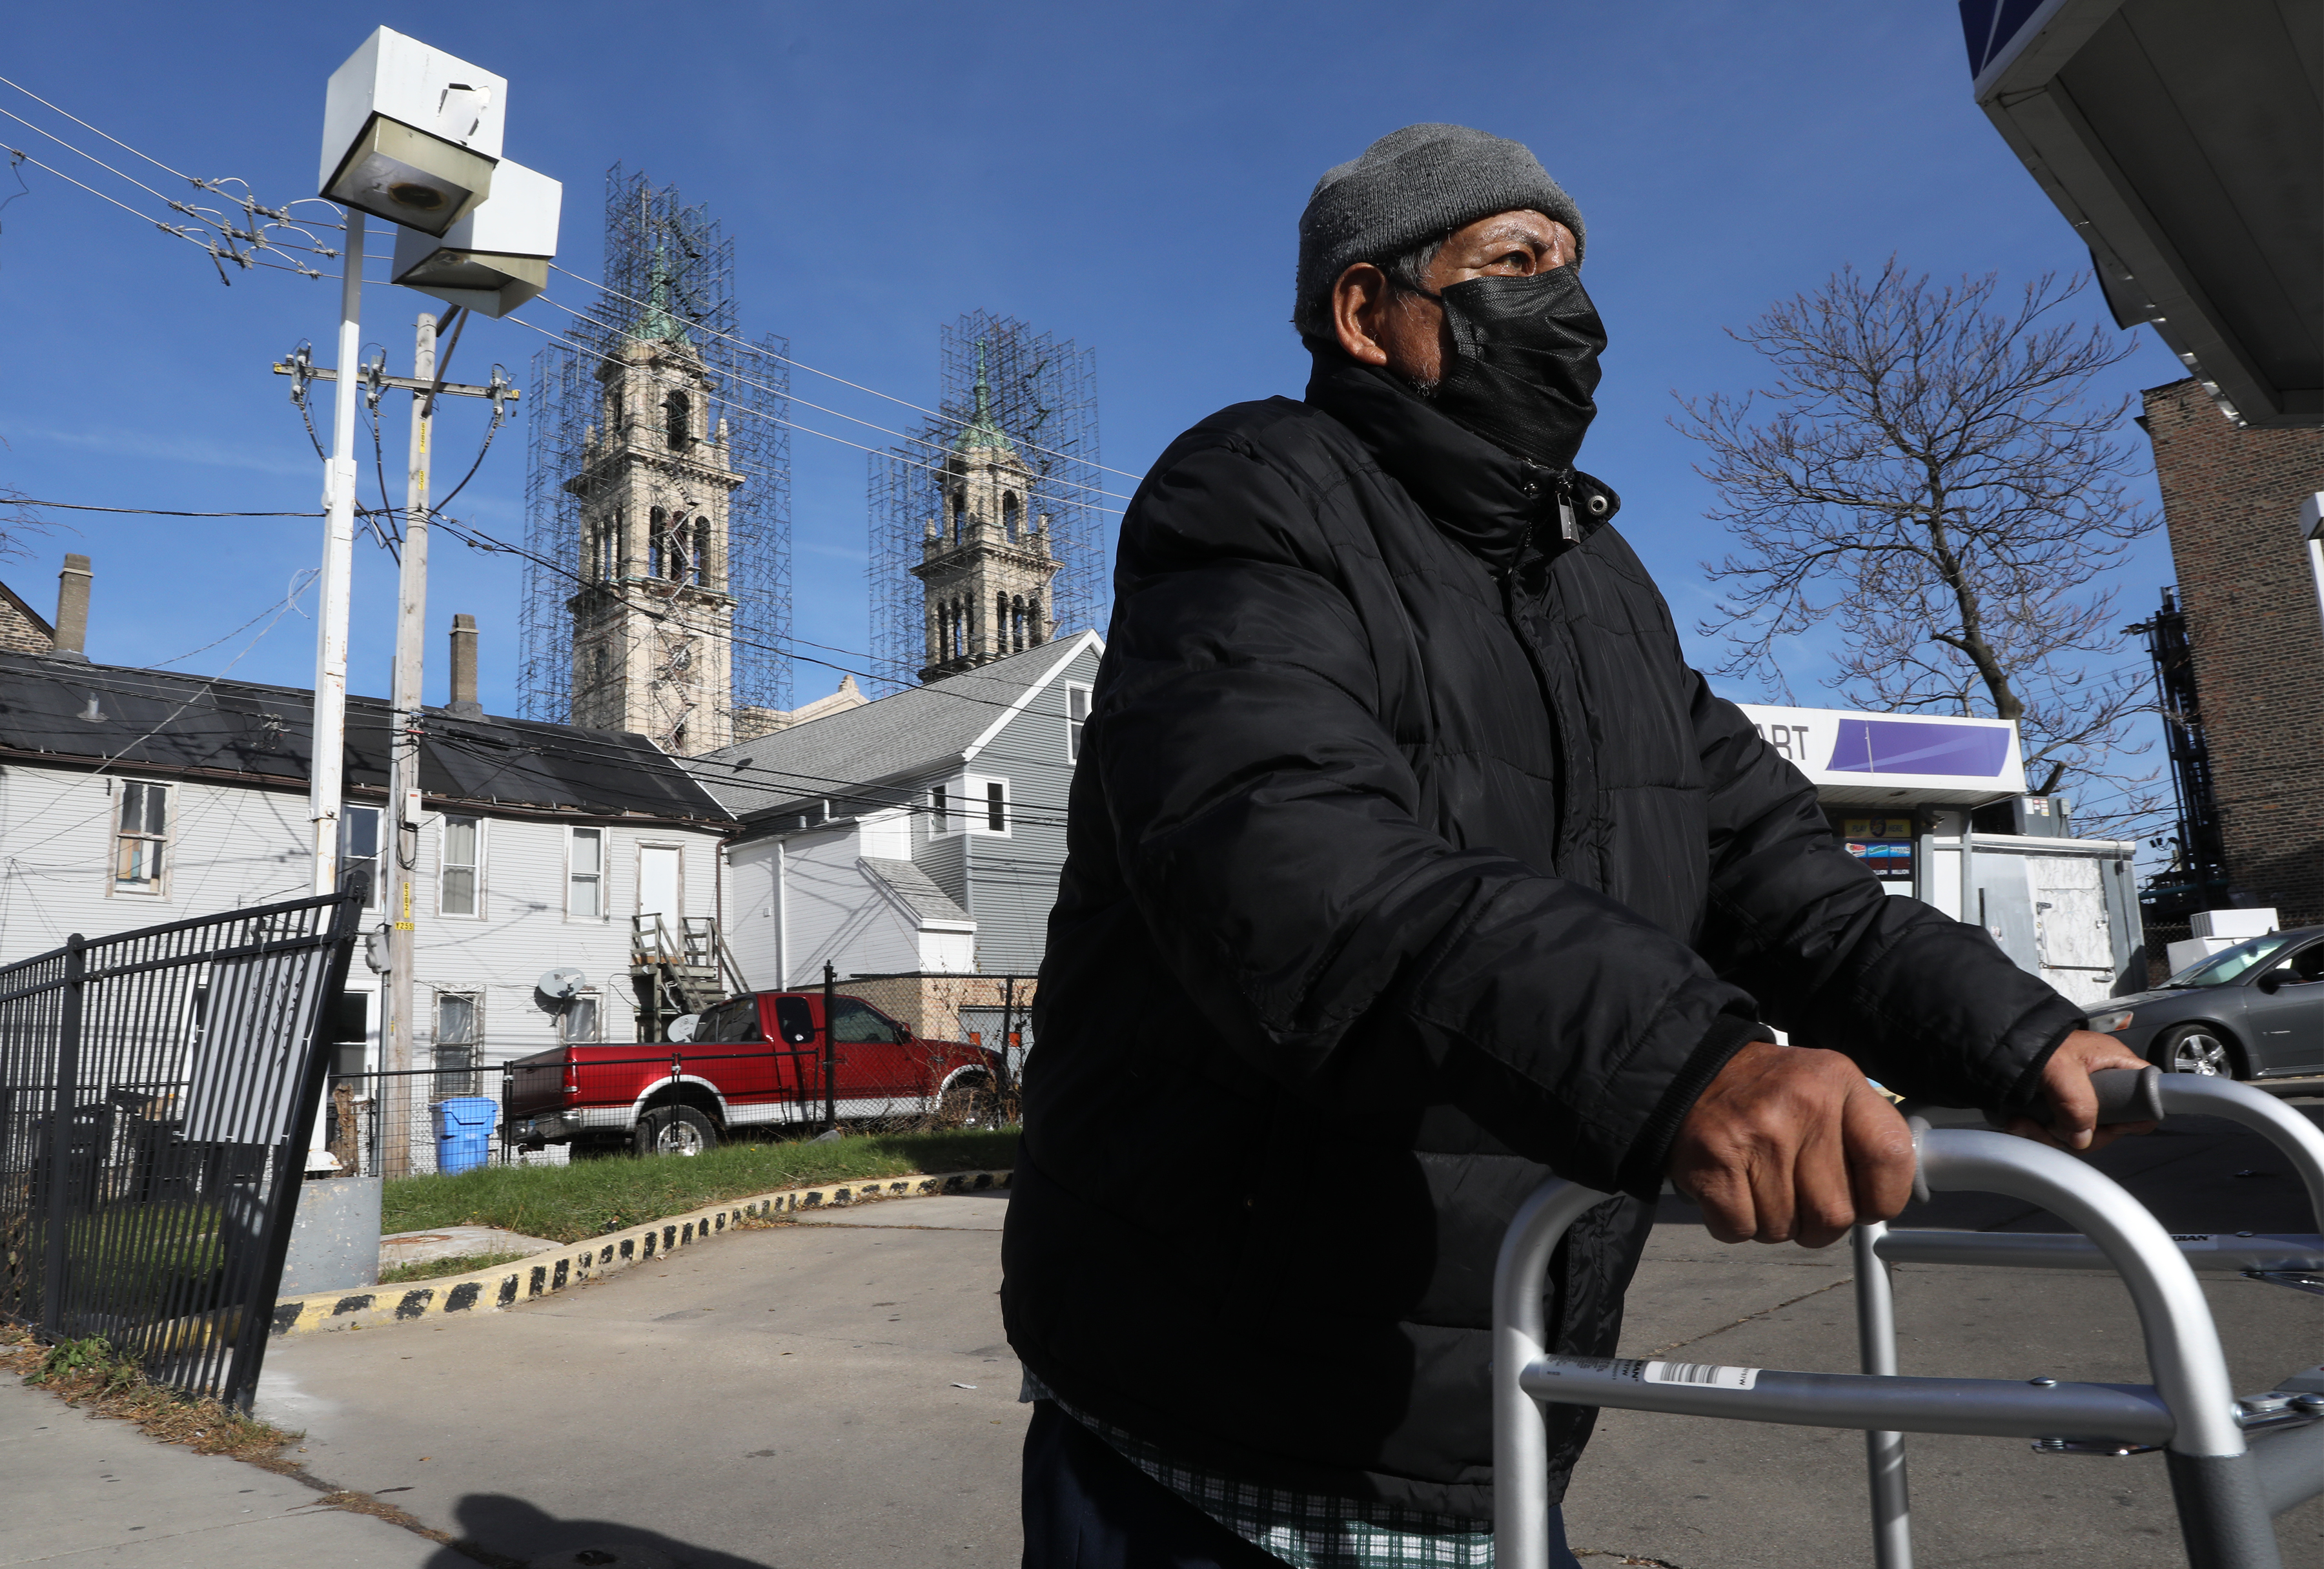 An elderly man, an undocumented senior, holds a walker as he walks down the street. He's wearing a black winter coat and black face mask. Behind him are the steeples of a church against a clear blue sky.